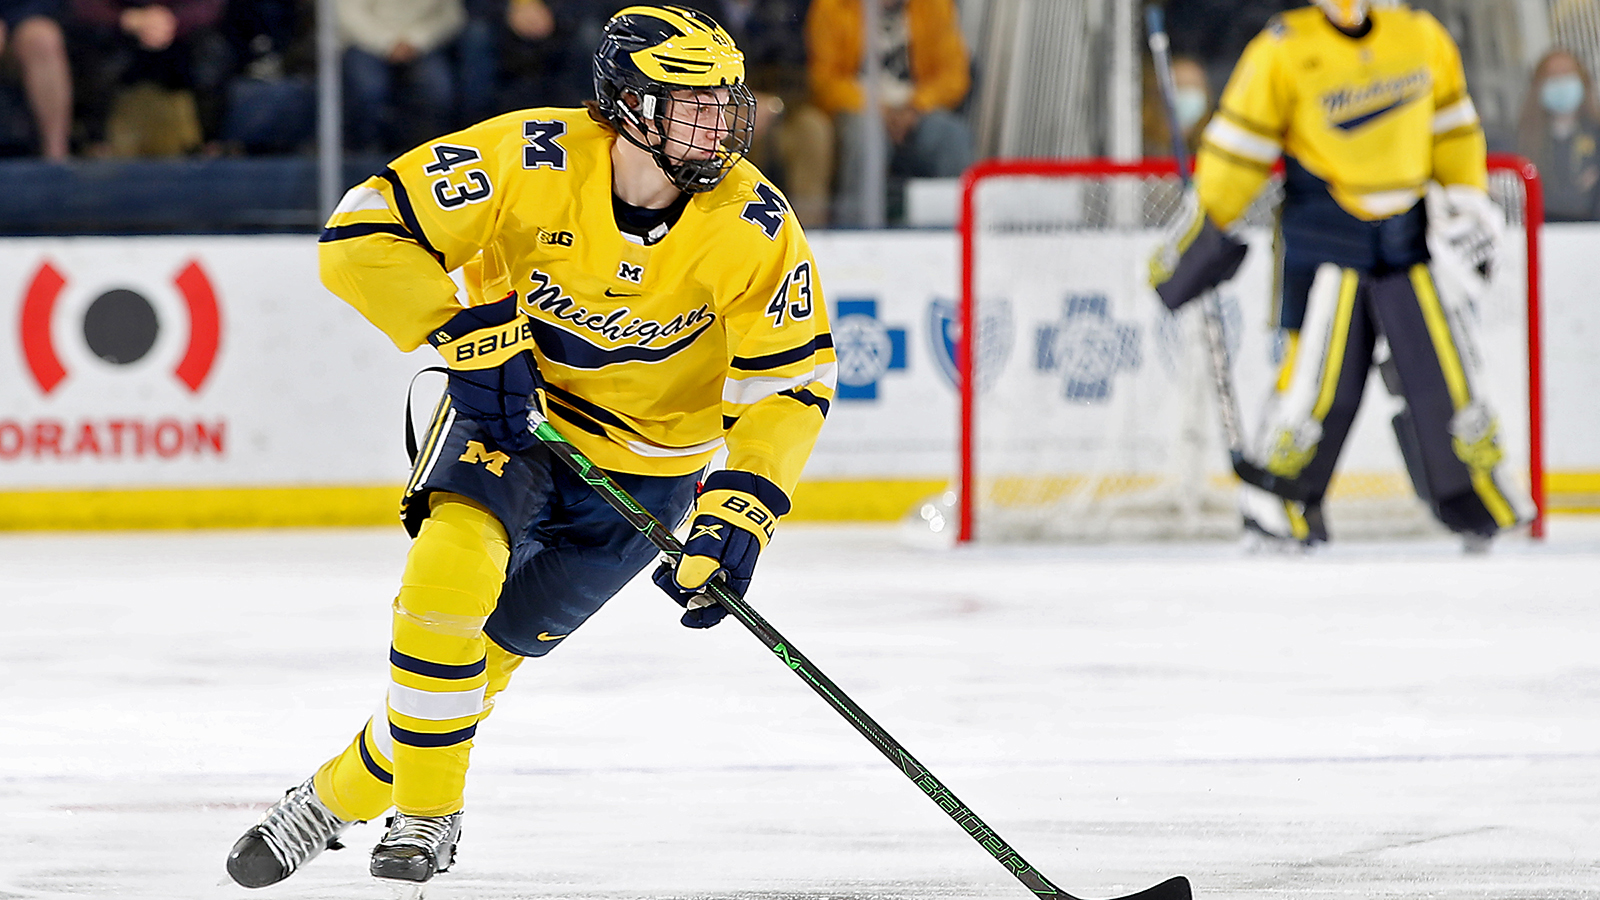 Union men's hockey needs to have a better effort against Quinnipiac